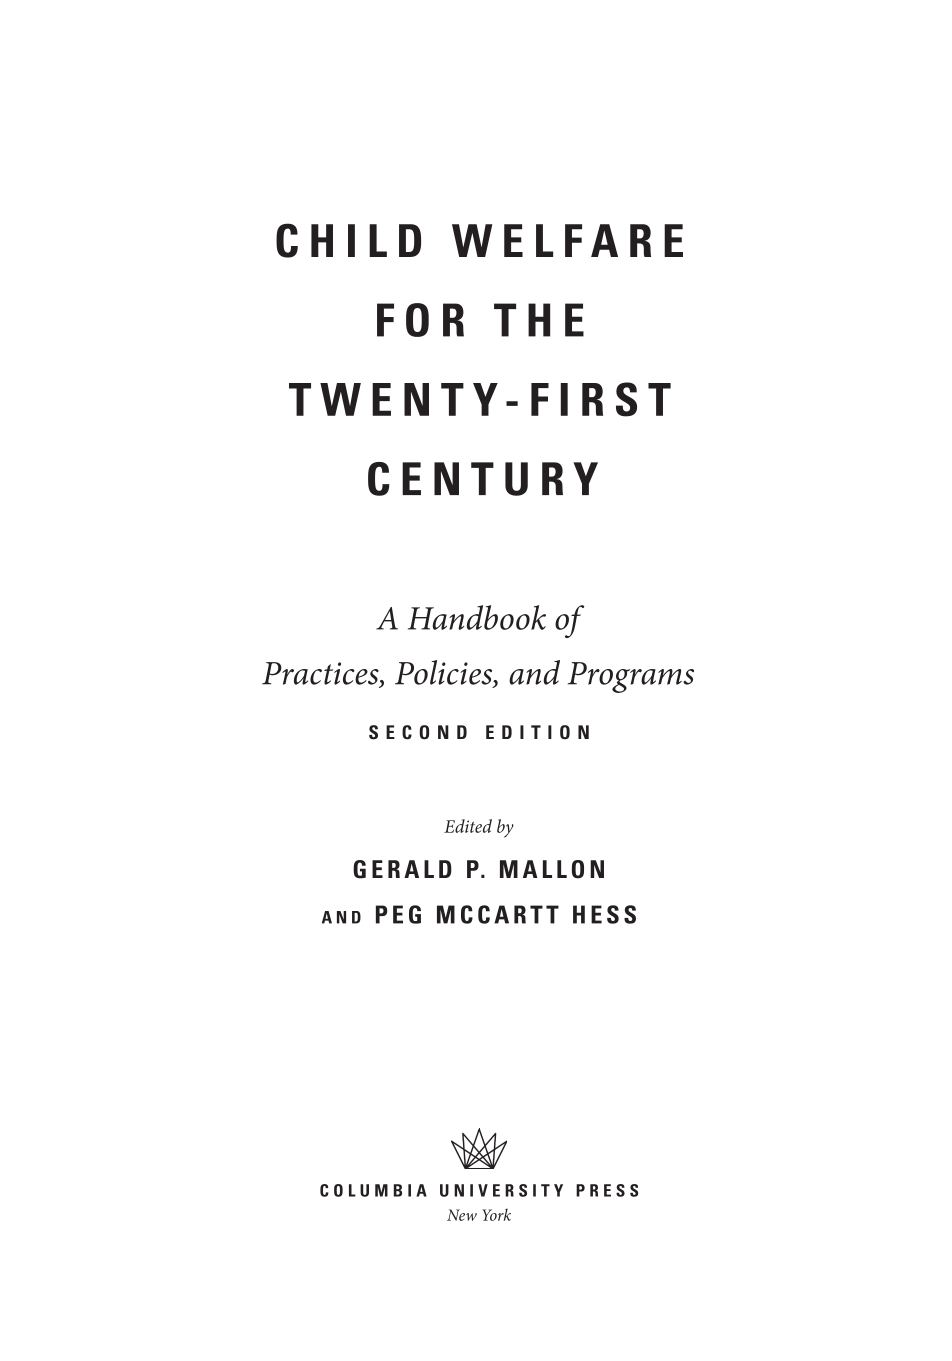 Child Welfare for the Twenty-first Century: A Handbook of Practices, Policies, and Programs, second edition page iii